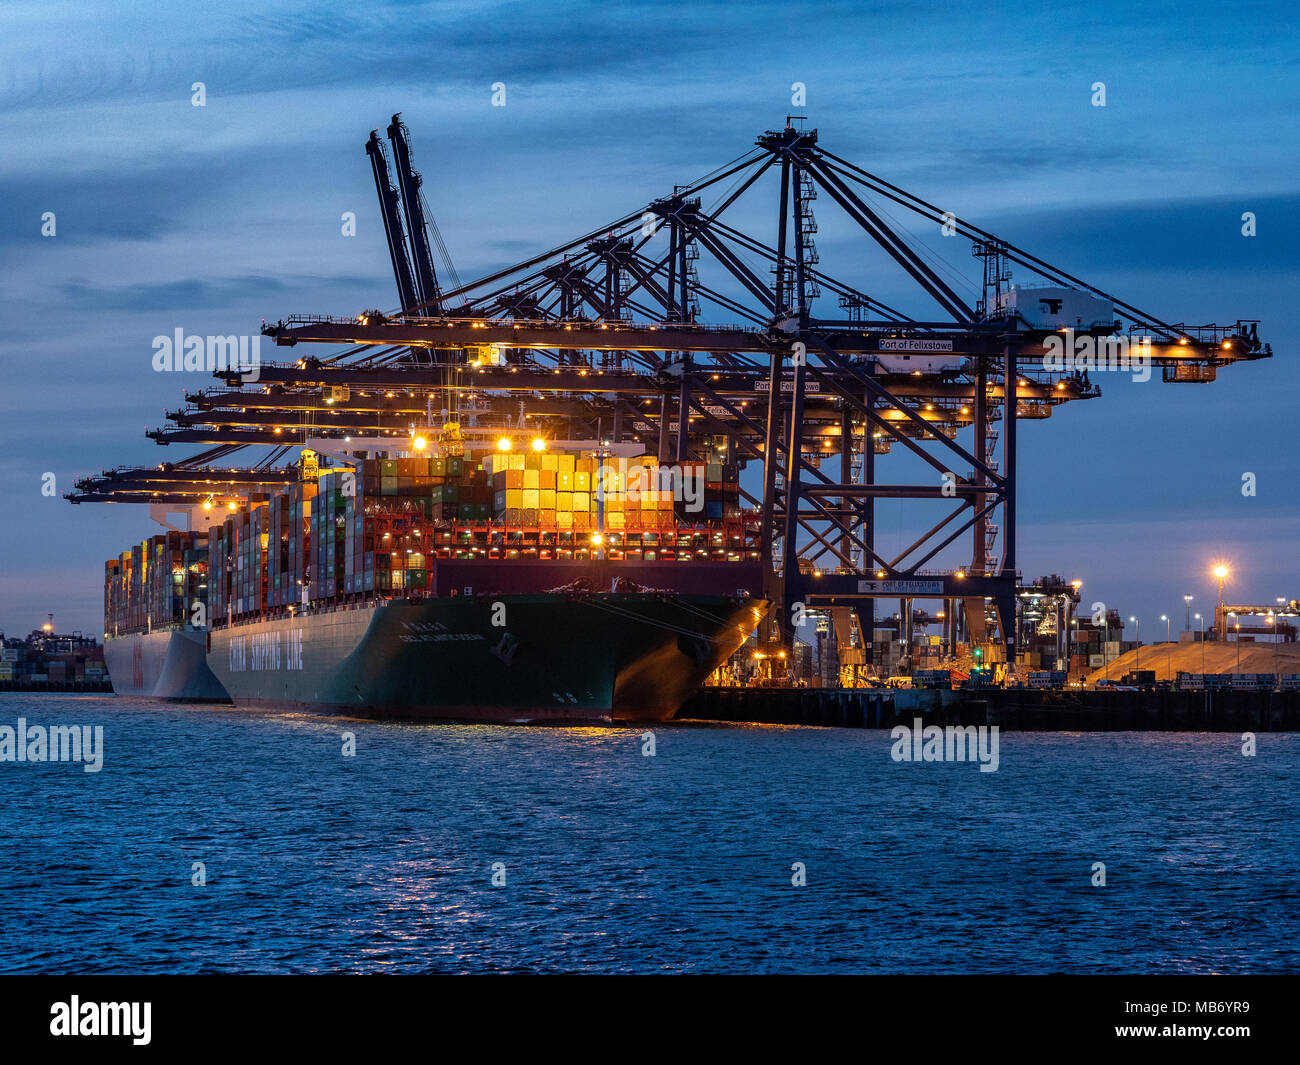 World Trade - Large Container Ships loading and unloading containers at the Port of Felixstowe, the UK's largest container port at dusk. Stock Photo